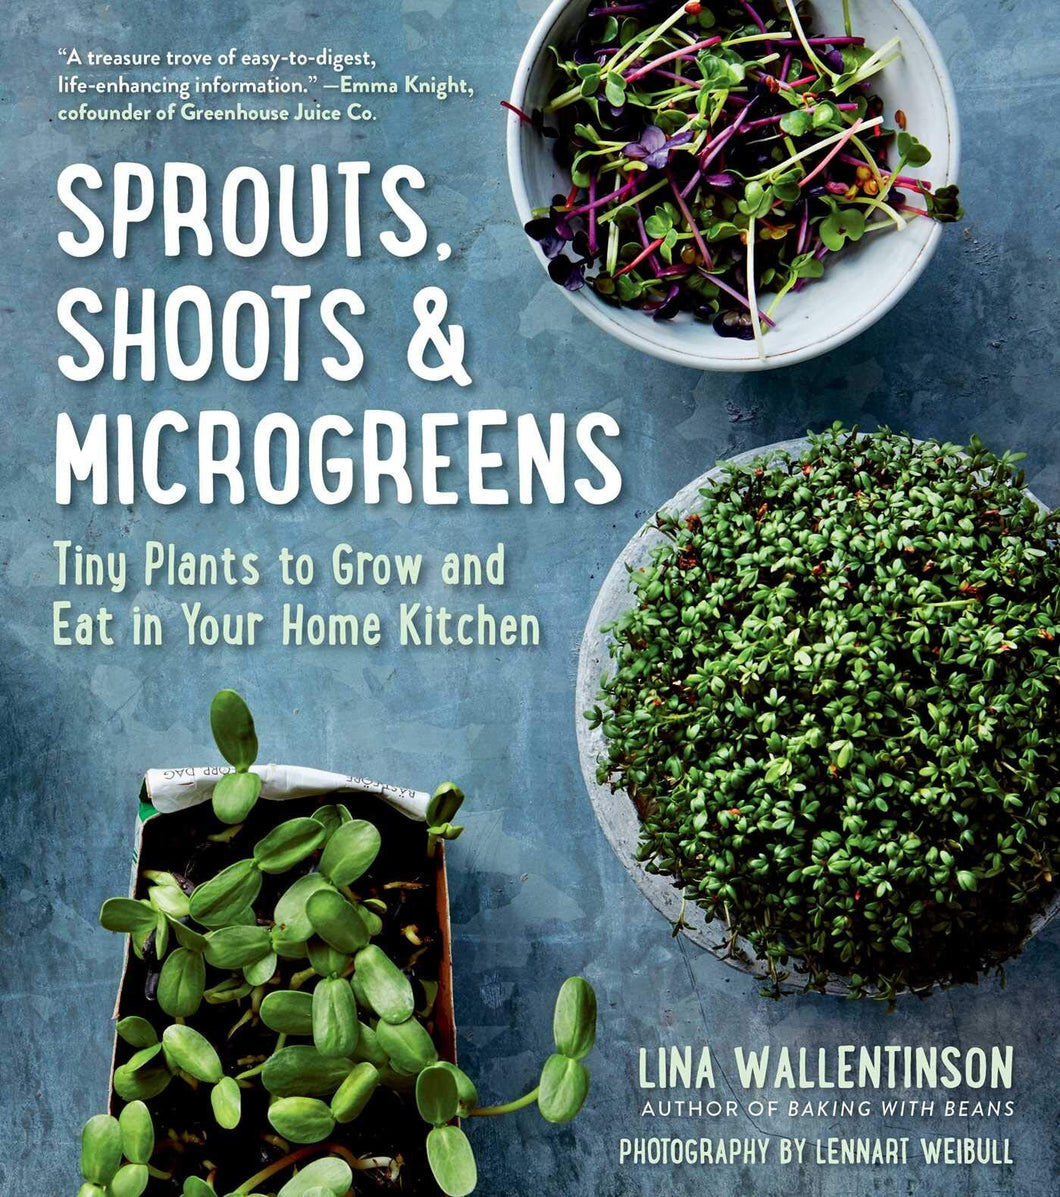 Sprouts, Shoots & Microgreens: Tiny Plants to Grow and Eat in Your Home Kitchen